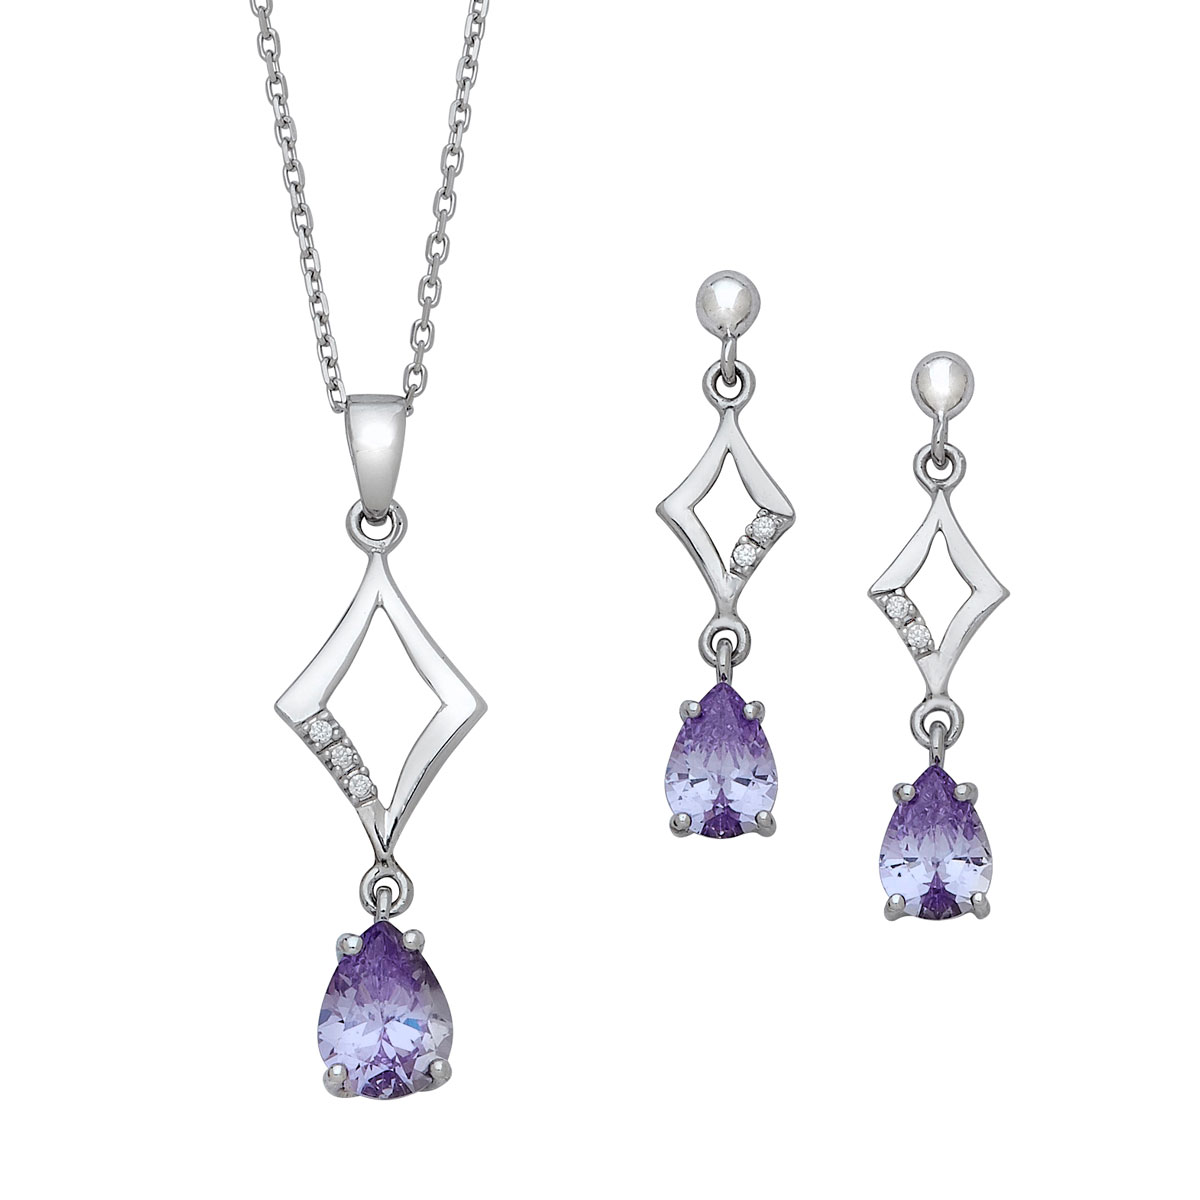 Silver Rhombus Shape with White CZ's and a Pear Shape Lilac Color CZ Dangle Pendant and Earring Set